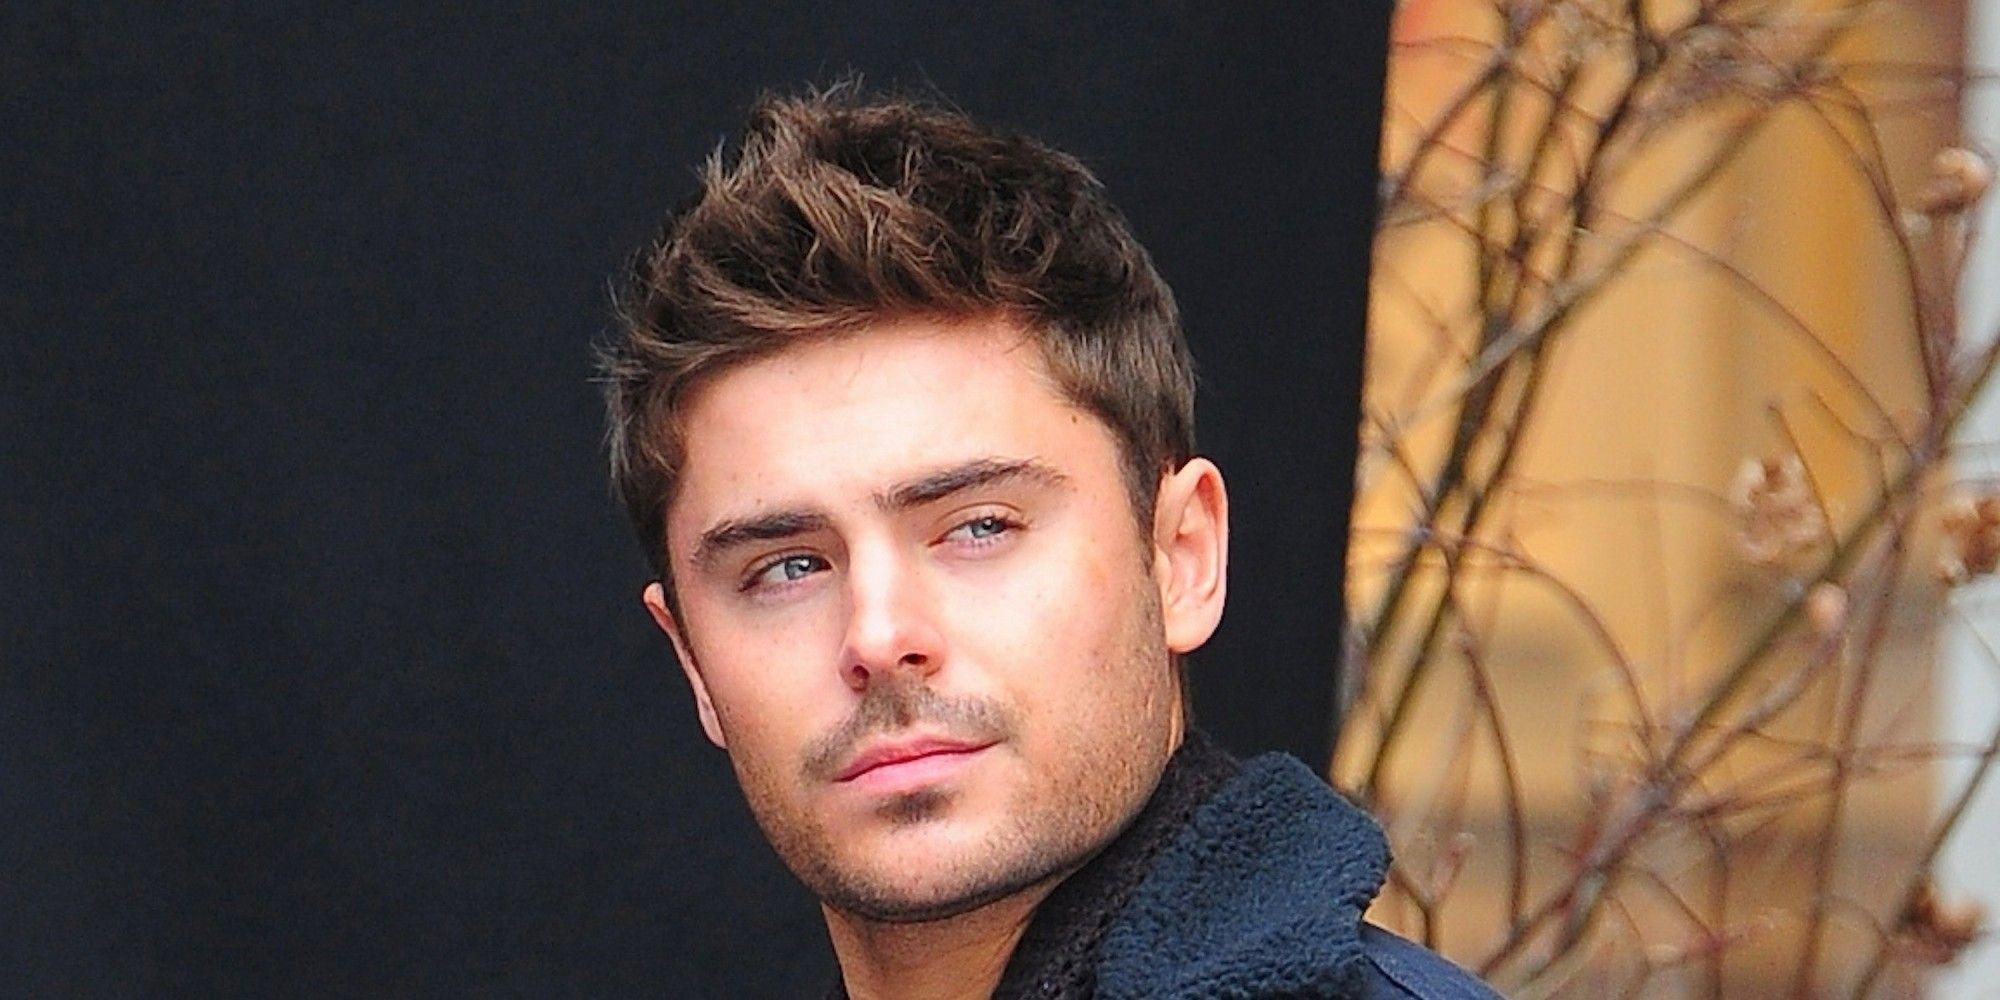 Zac Efron's Broken Jaw Doesn't Stop Him From Going To The Gym